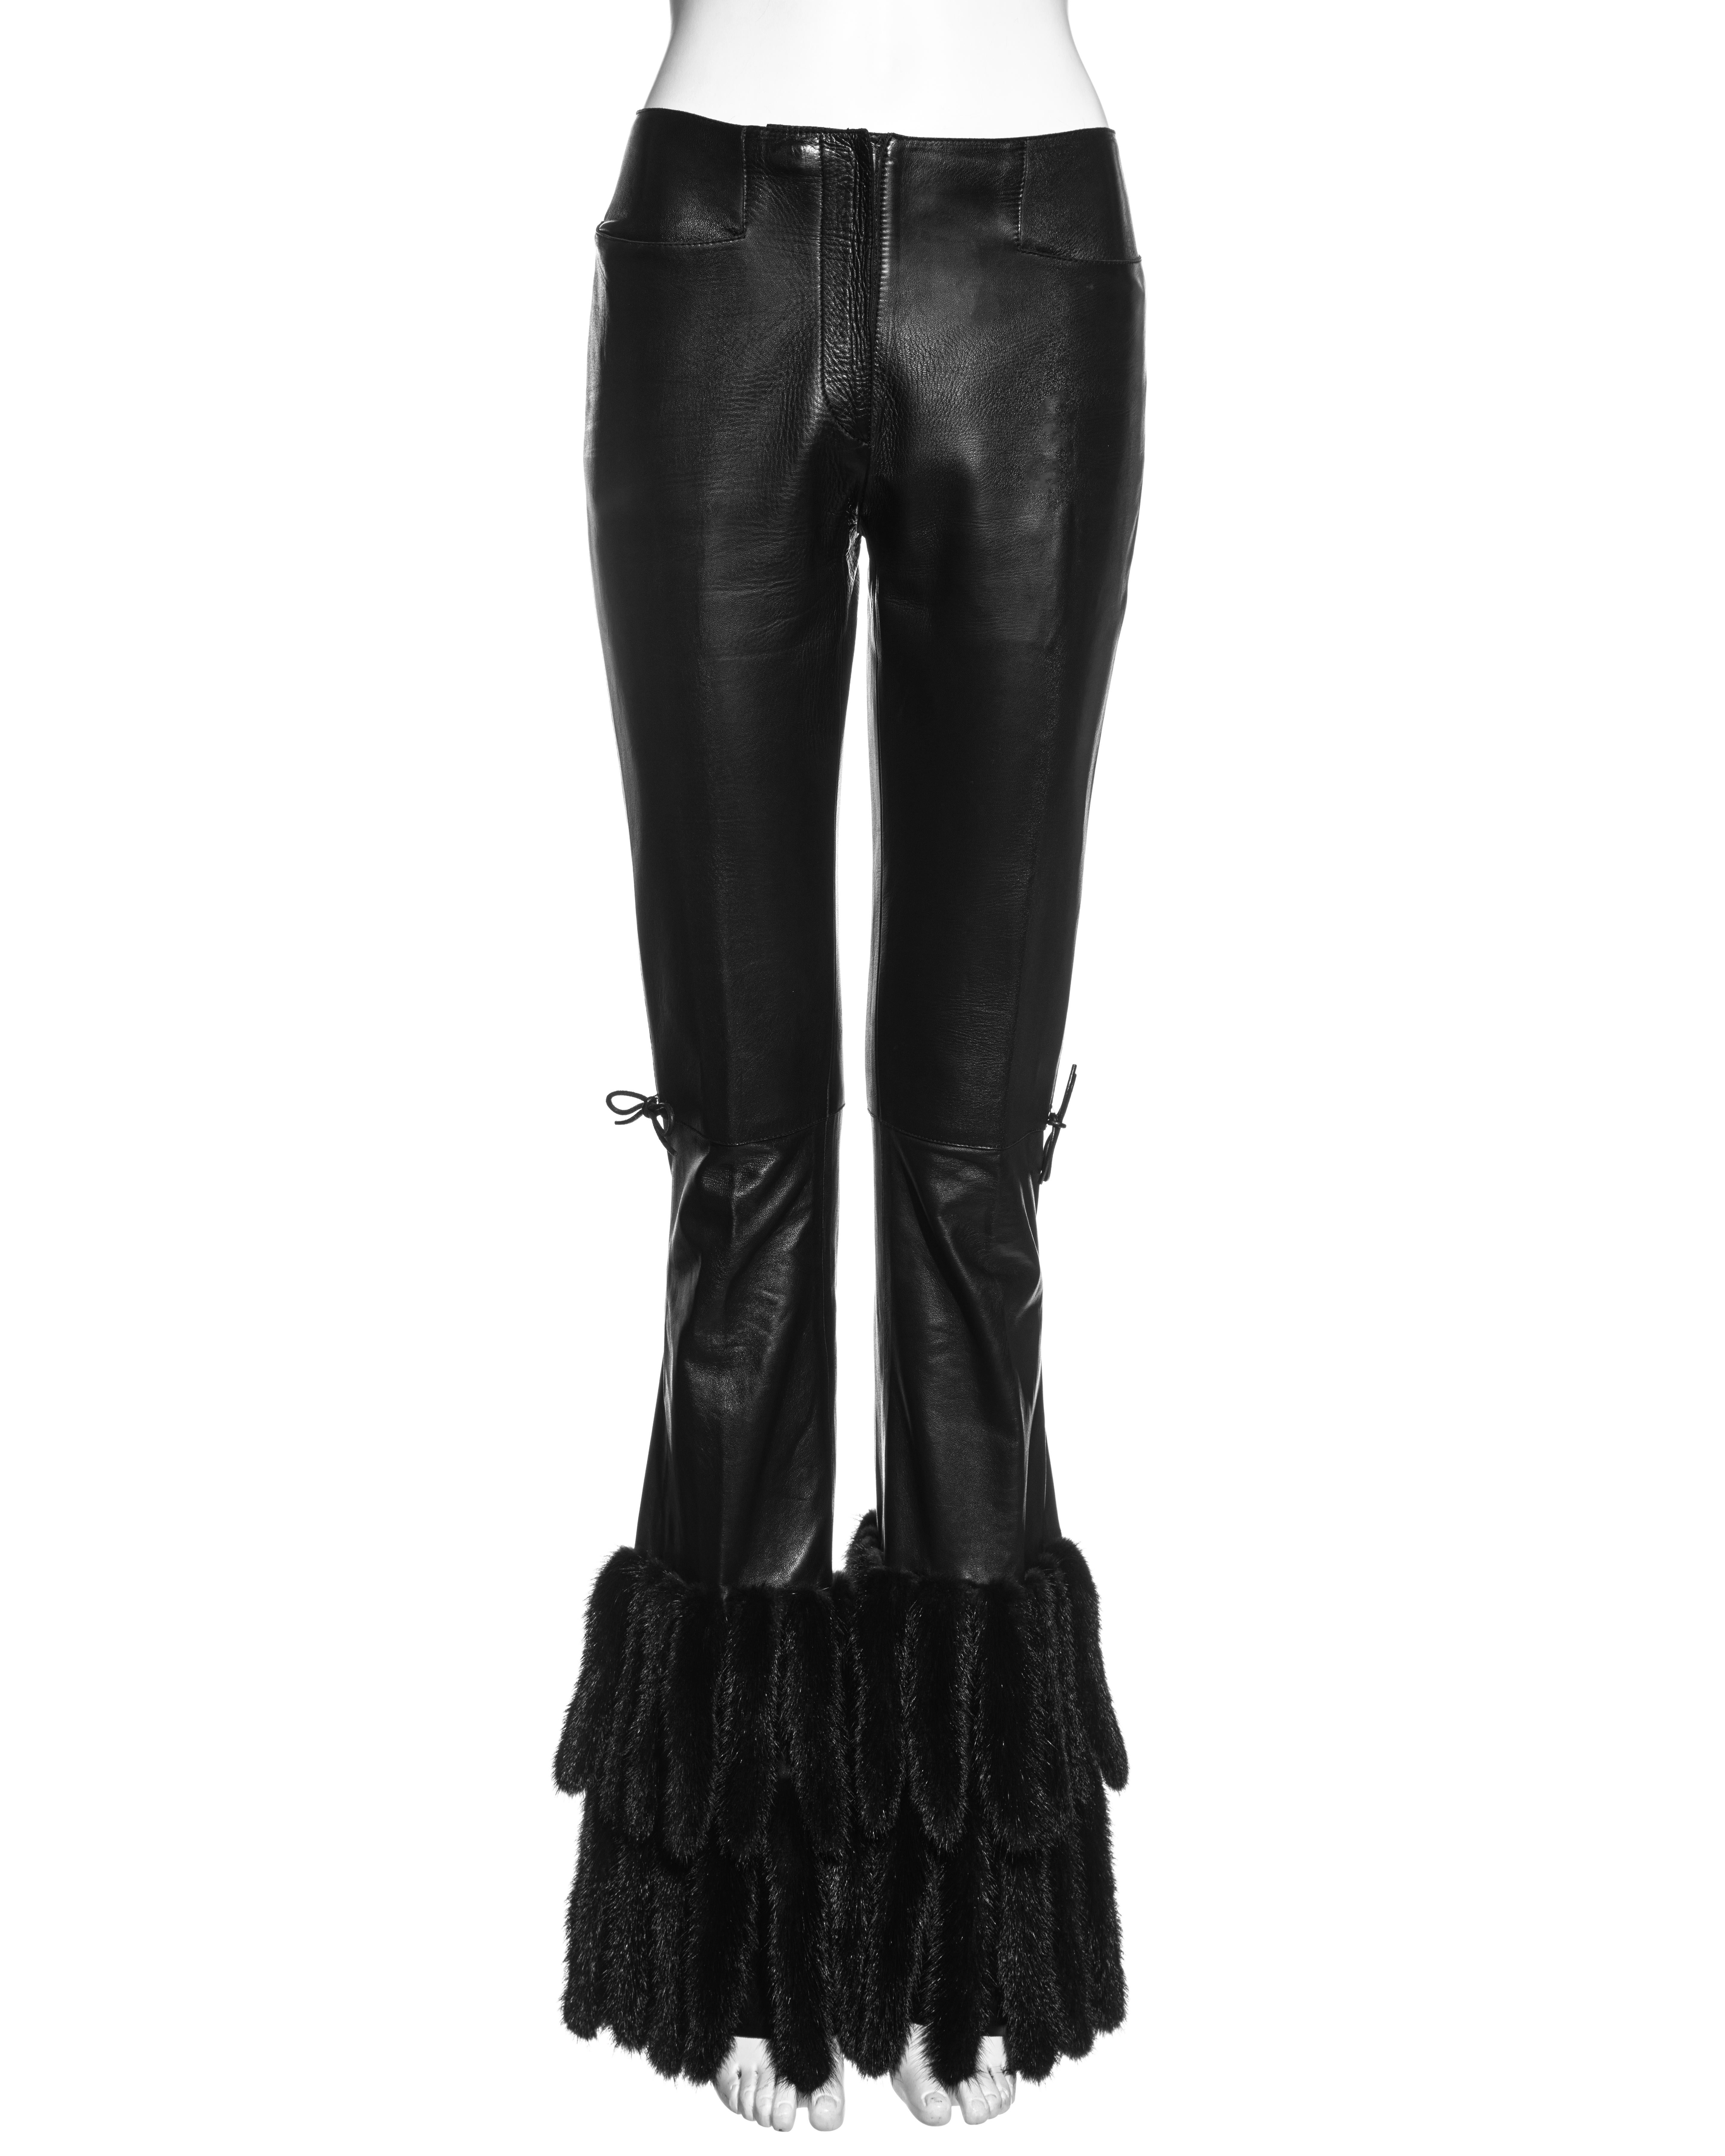 ▪ Gucci black leather flared pants 
▪ Designed by Tom Ford
▪ Dark brown mink fur tails at the hem
▪ Leather ribbon bow detail at both knees 
▪ IT 38 - FR 34 - UK 6 - US 2
▪ Fall-Winter 1999